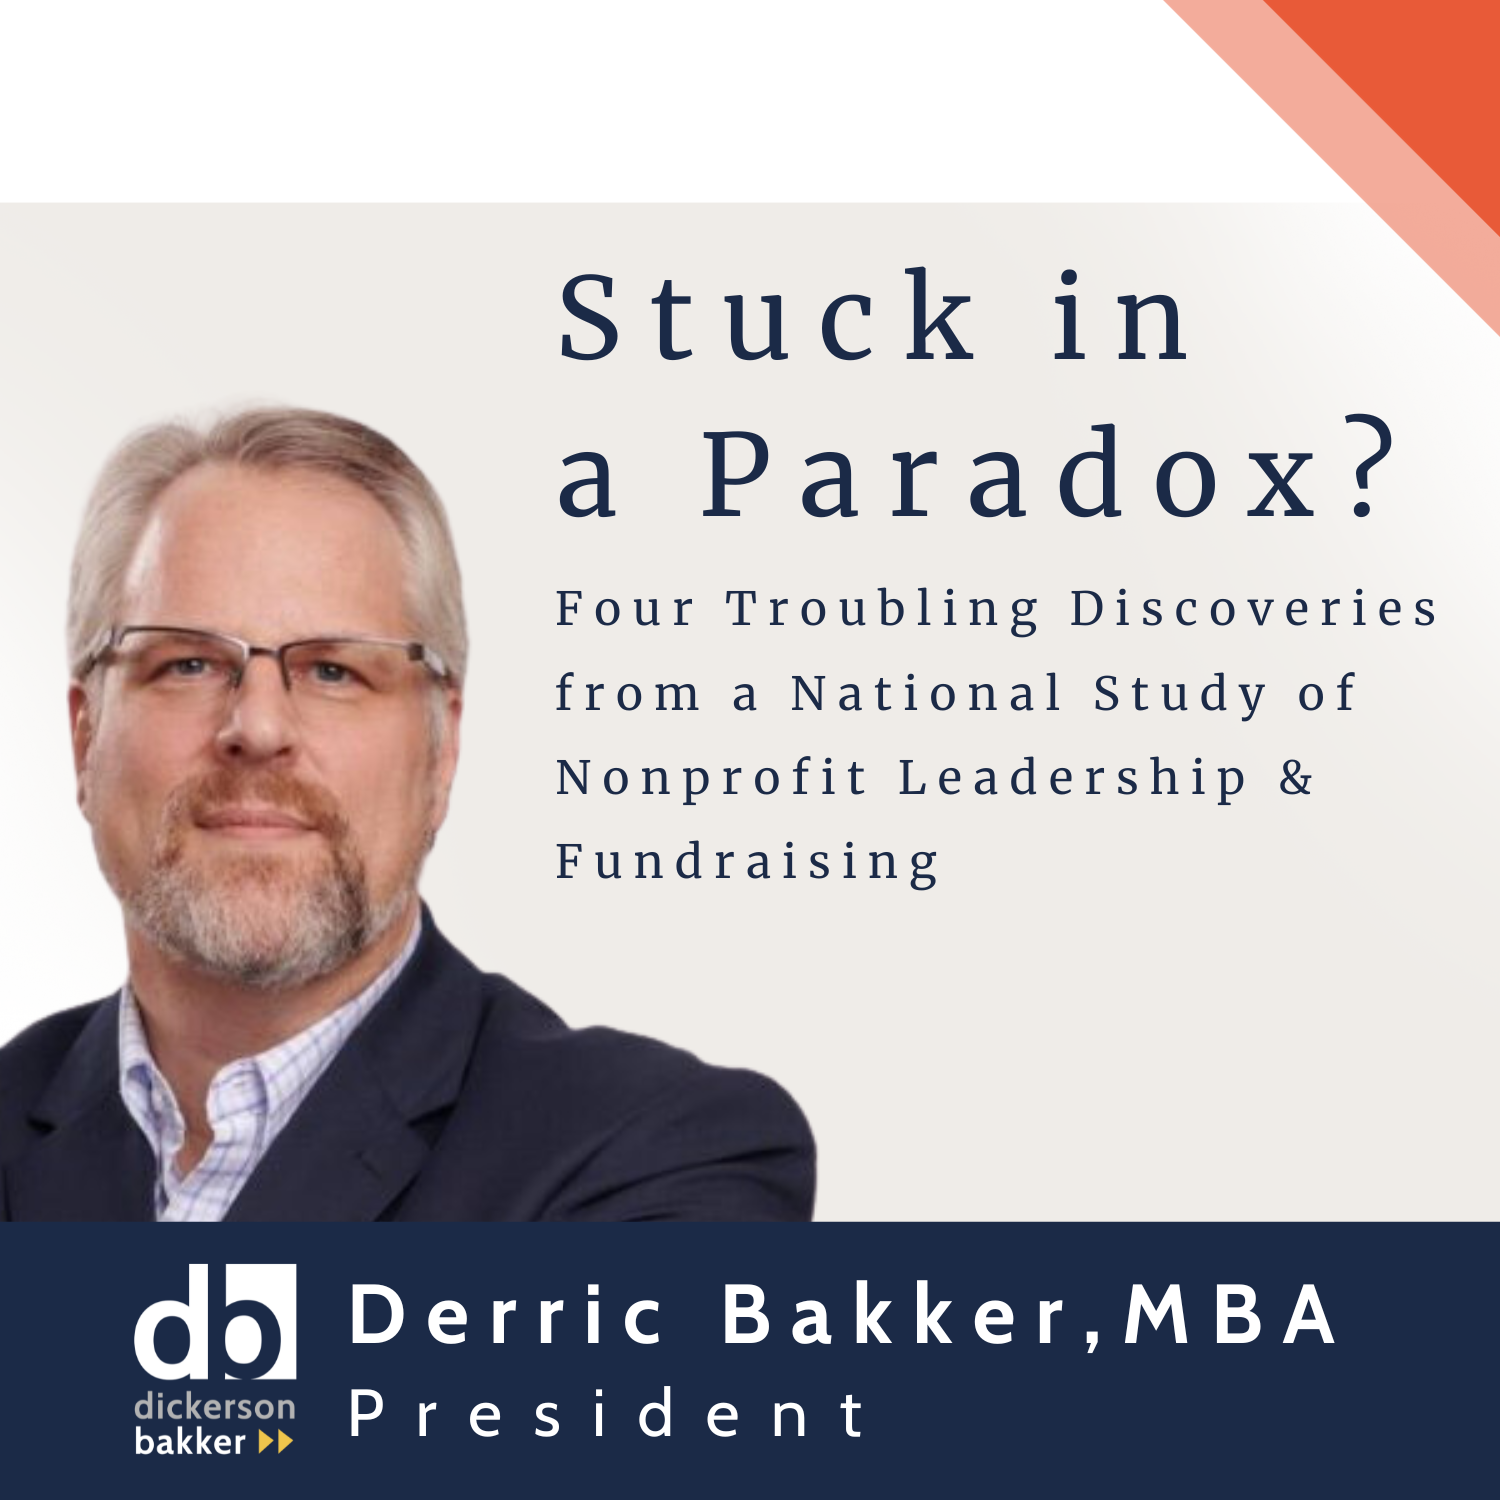 Stuck in a Paradox? Image of Derric Bakker, MBA 